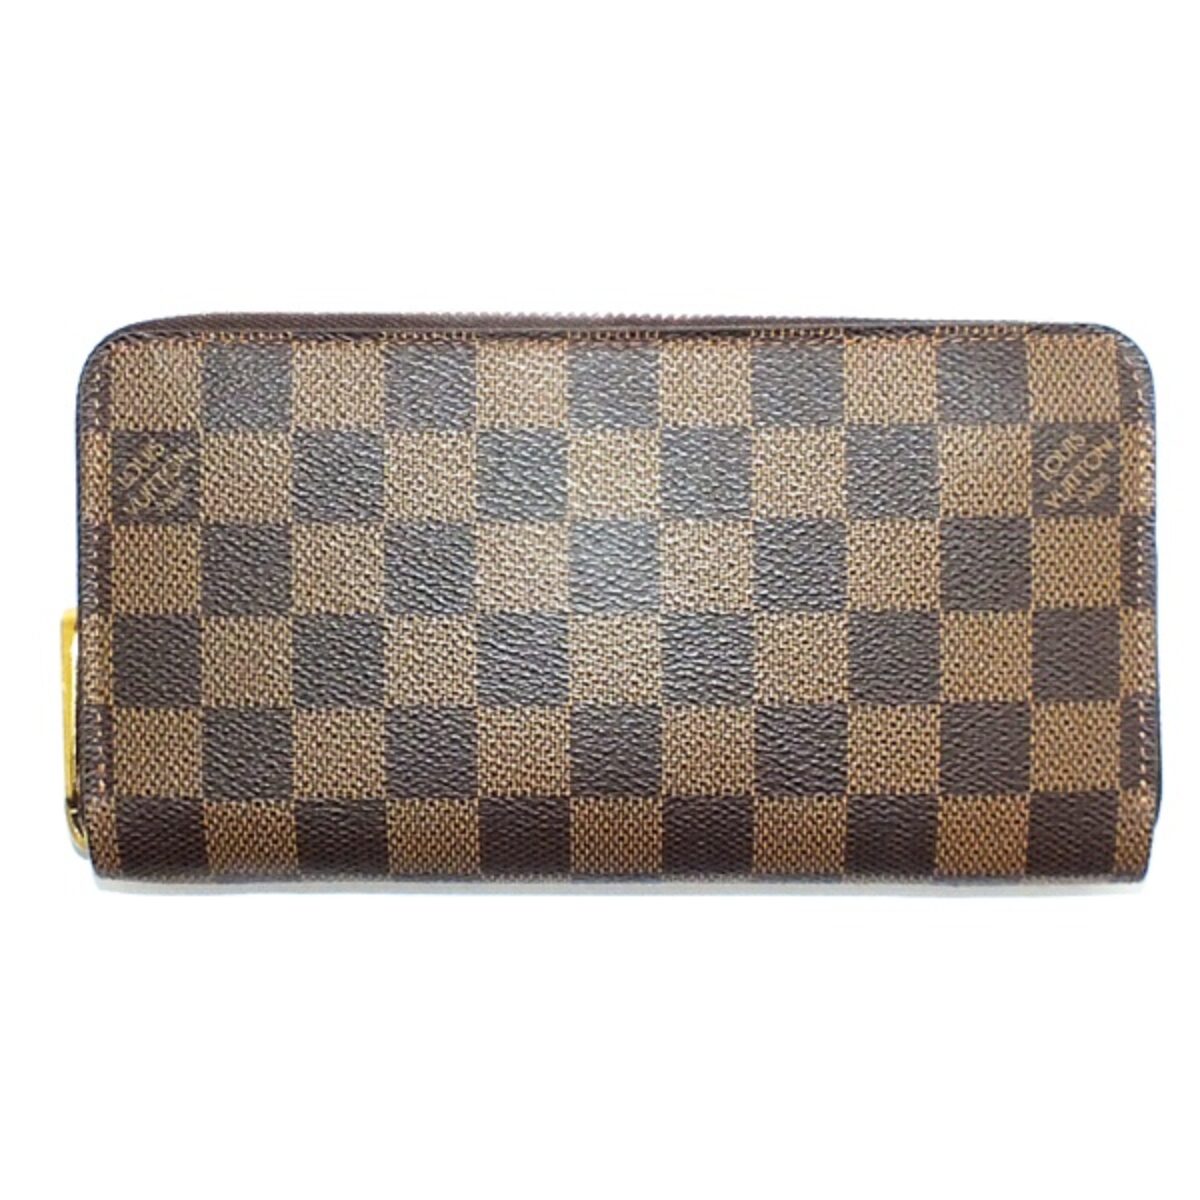 LOUIS VUITTON ルイヴィトン N60015 旧型 ジッピーウォレット ダミエ ...